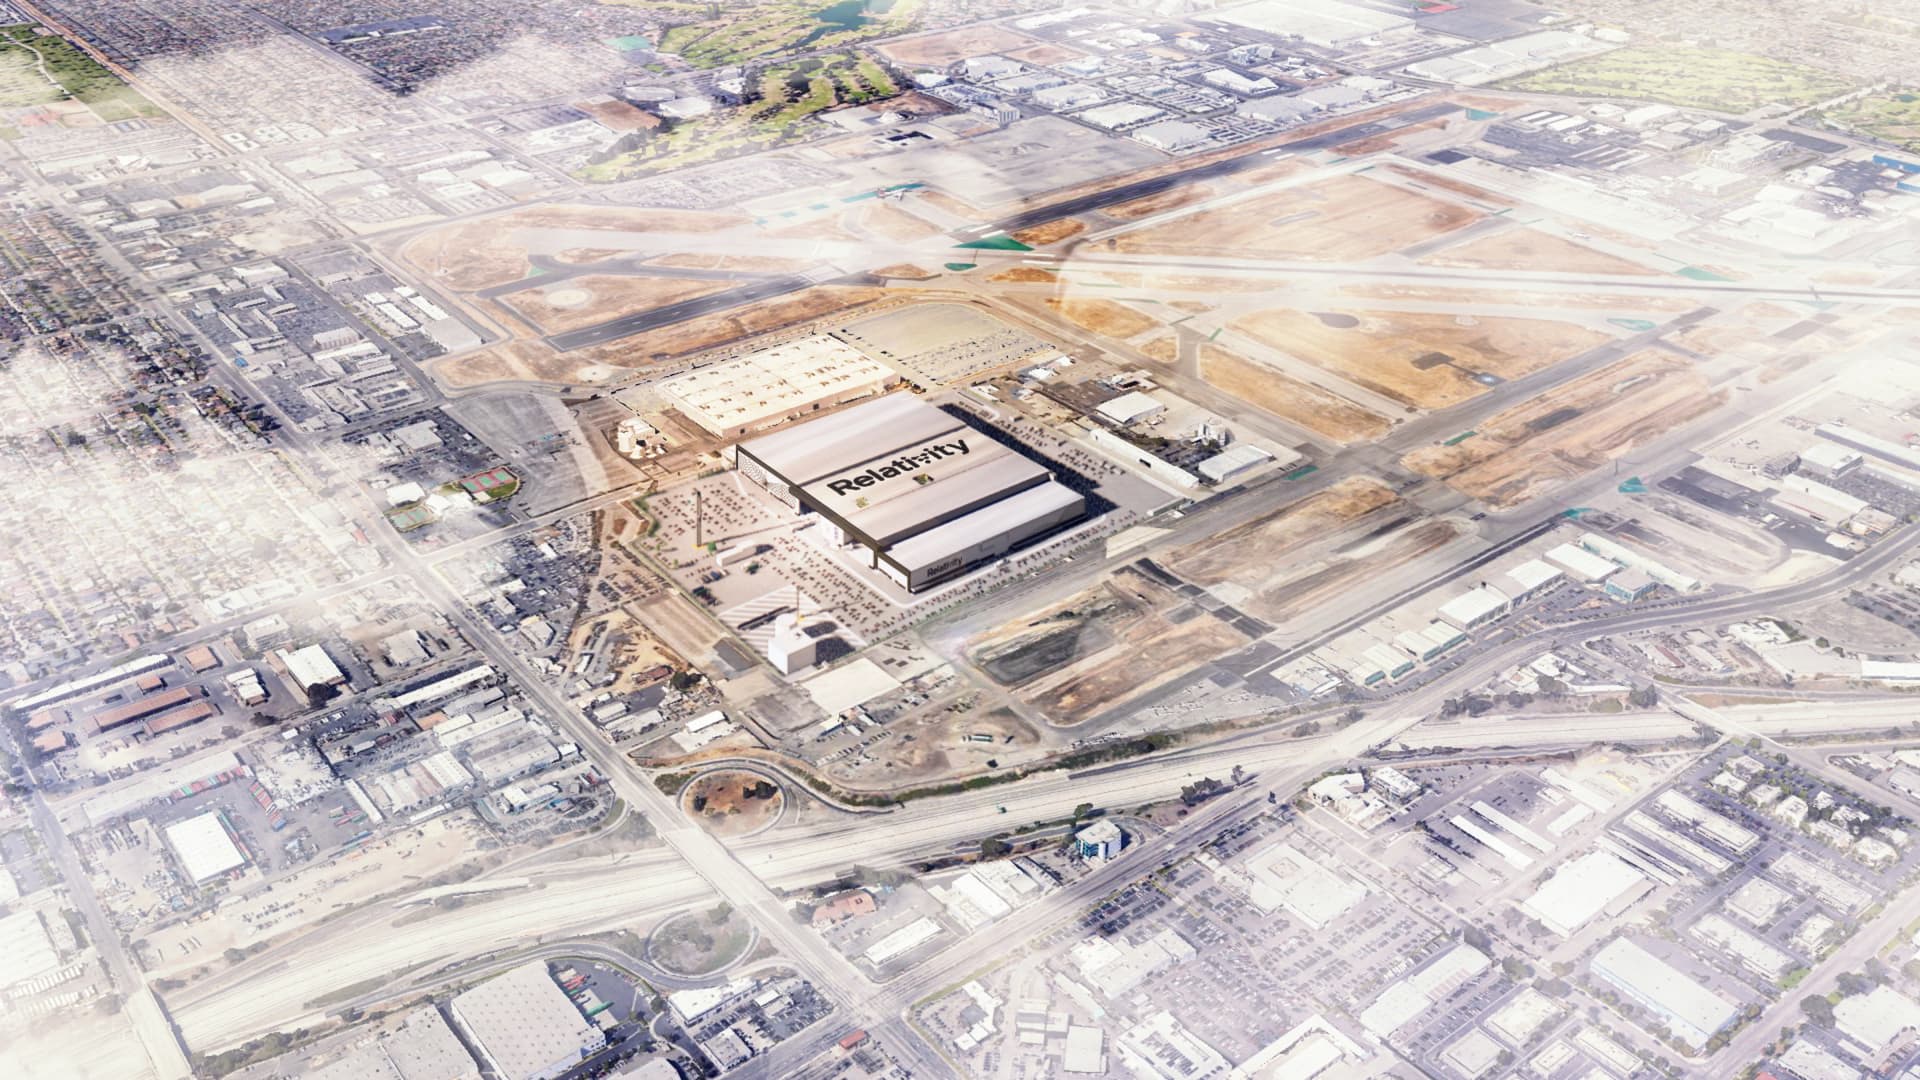 An aerial view of the company's planned factory near Long Beach Airport in California.